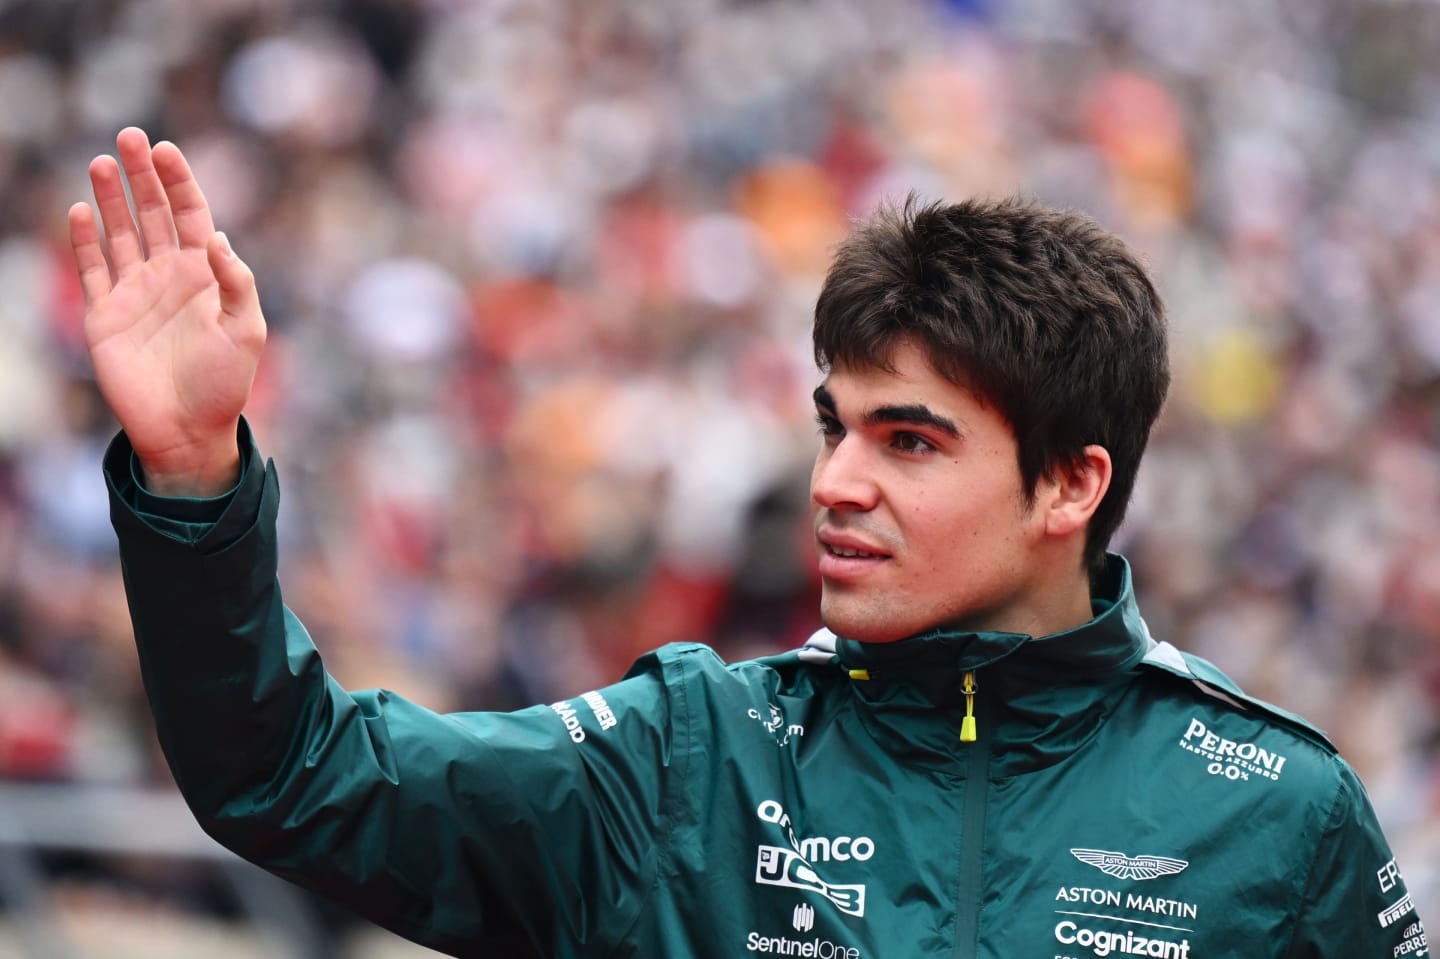 SUZUKA, JAPAN - OCTOBER 09: Lance Stroll of Canada and Aston Martin F1 Team waves to the crowd during the drivers parade ahead of the F1 Grand Prix of Japan at Suzuka International Racing Course on October 09, 2022 in Suzuka, Japan. (Photo by Clive Mason/Getty Images)